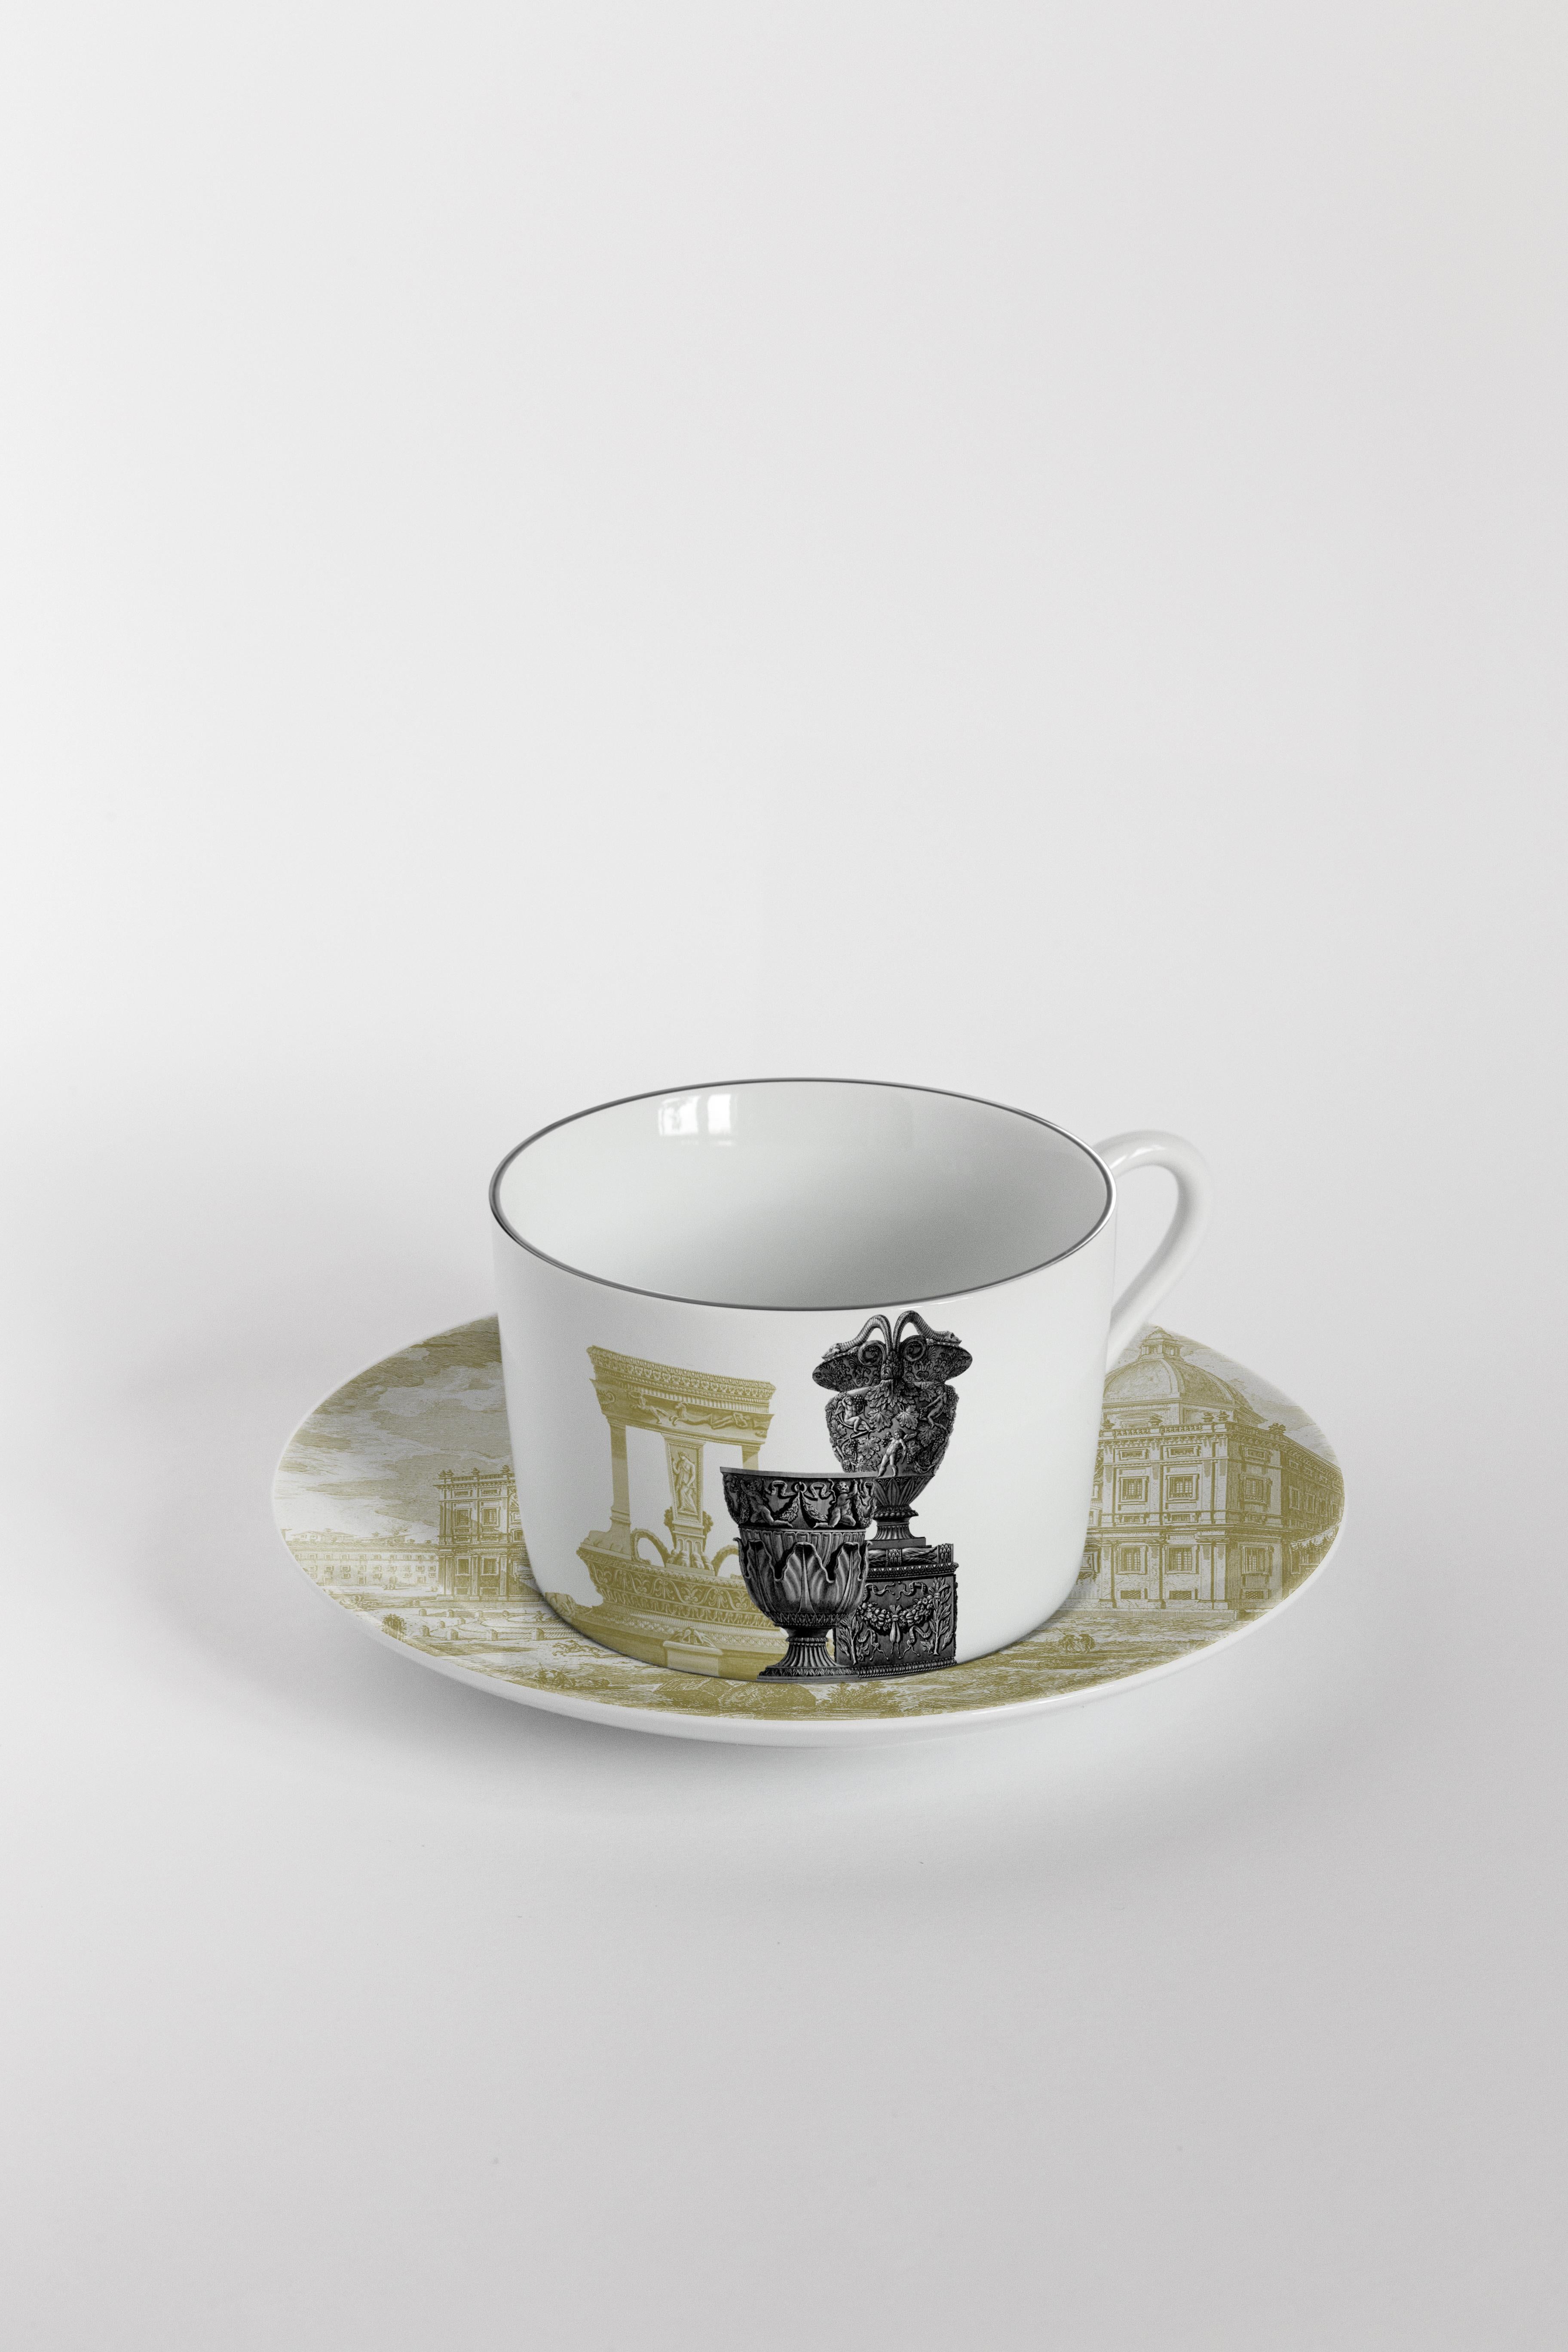 Roma, Tea Set with Six Contemporary Porcelains with Decorative Design For Sale 3